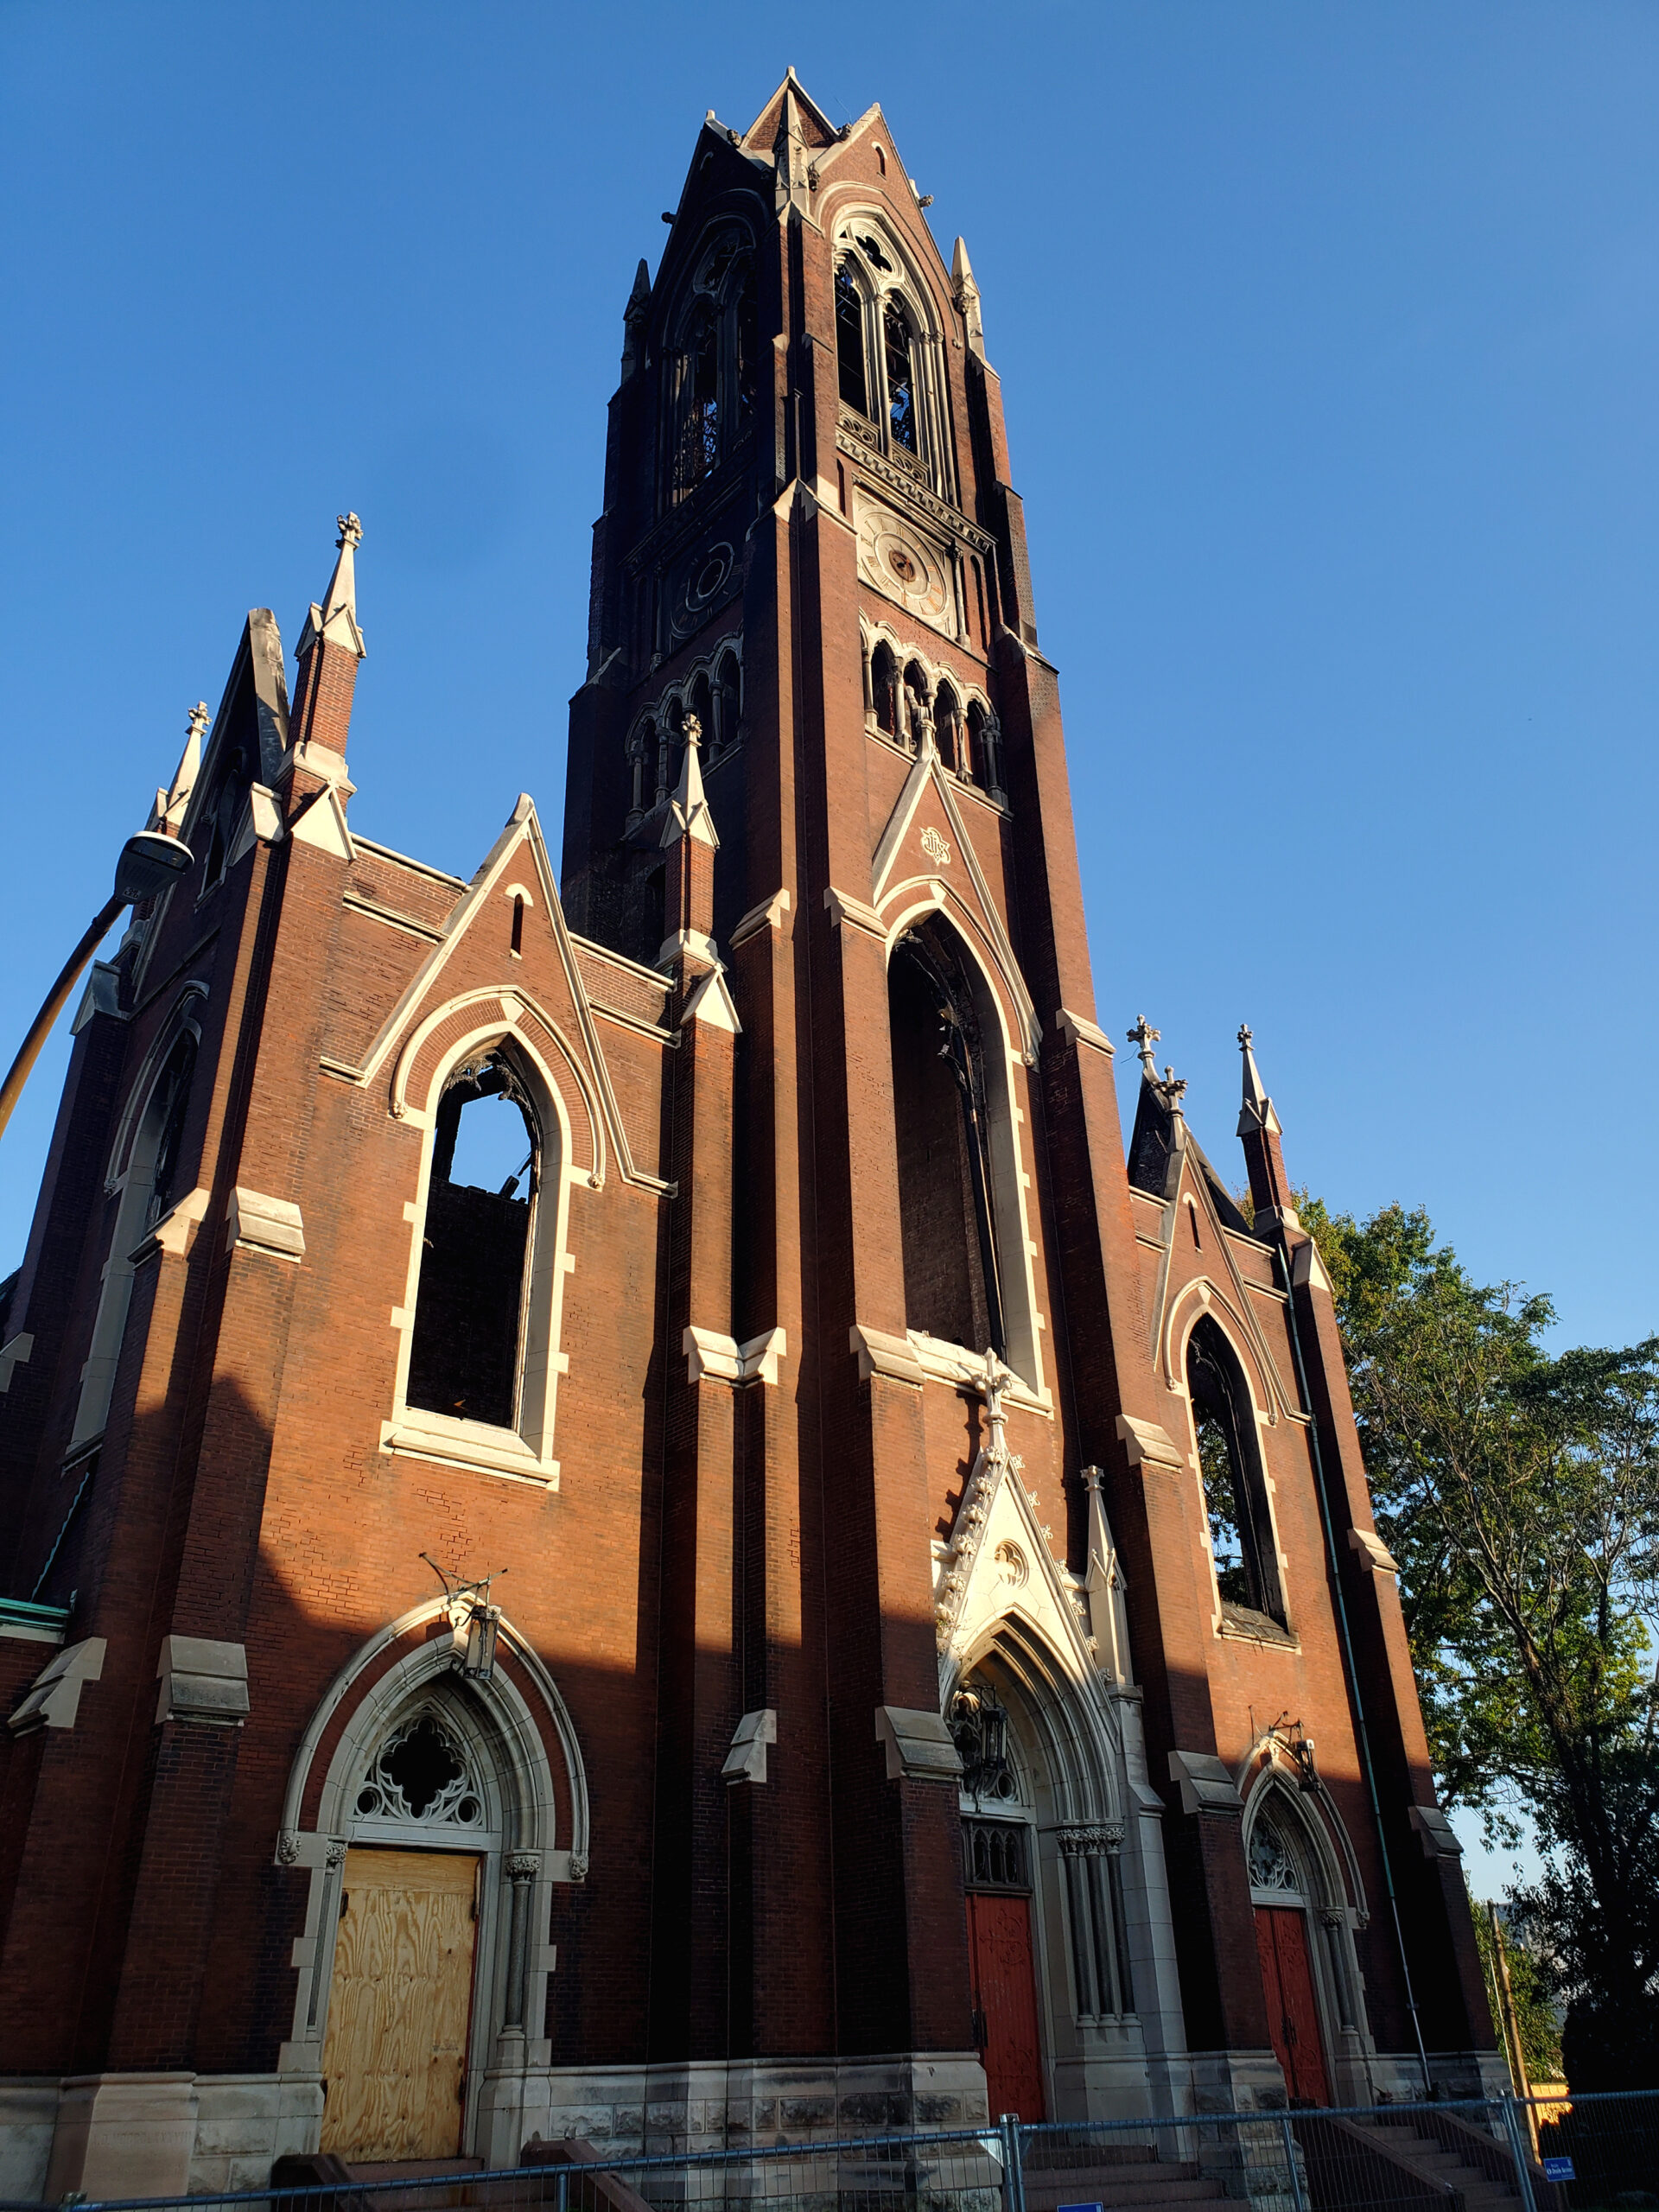 A red brick church with a boarded up door, scorch marks, and broken windows is visible in front of a blue sky.